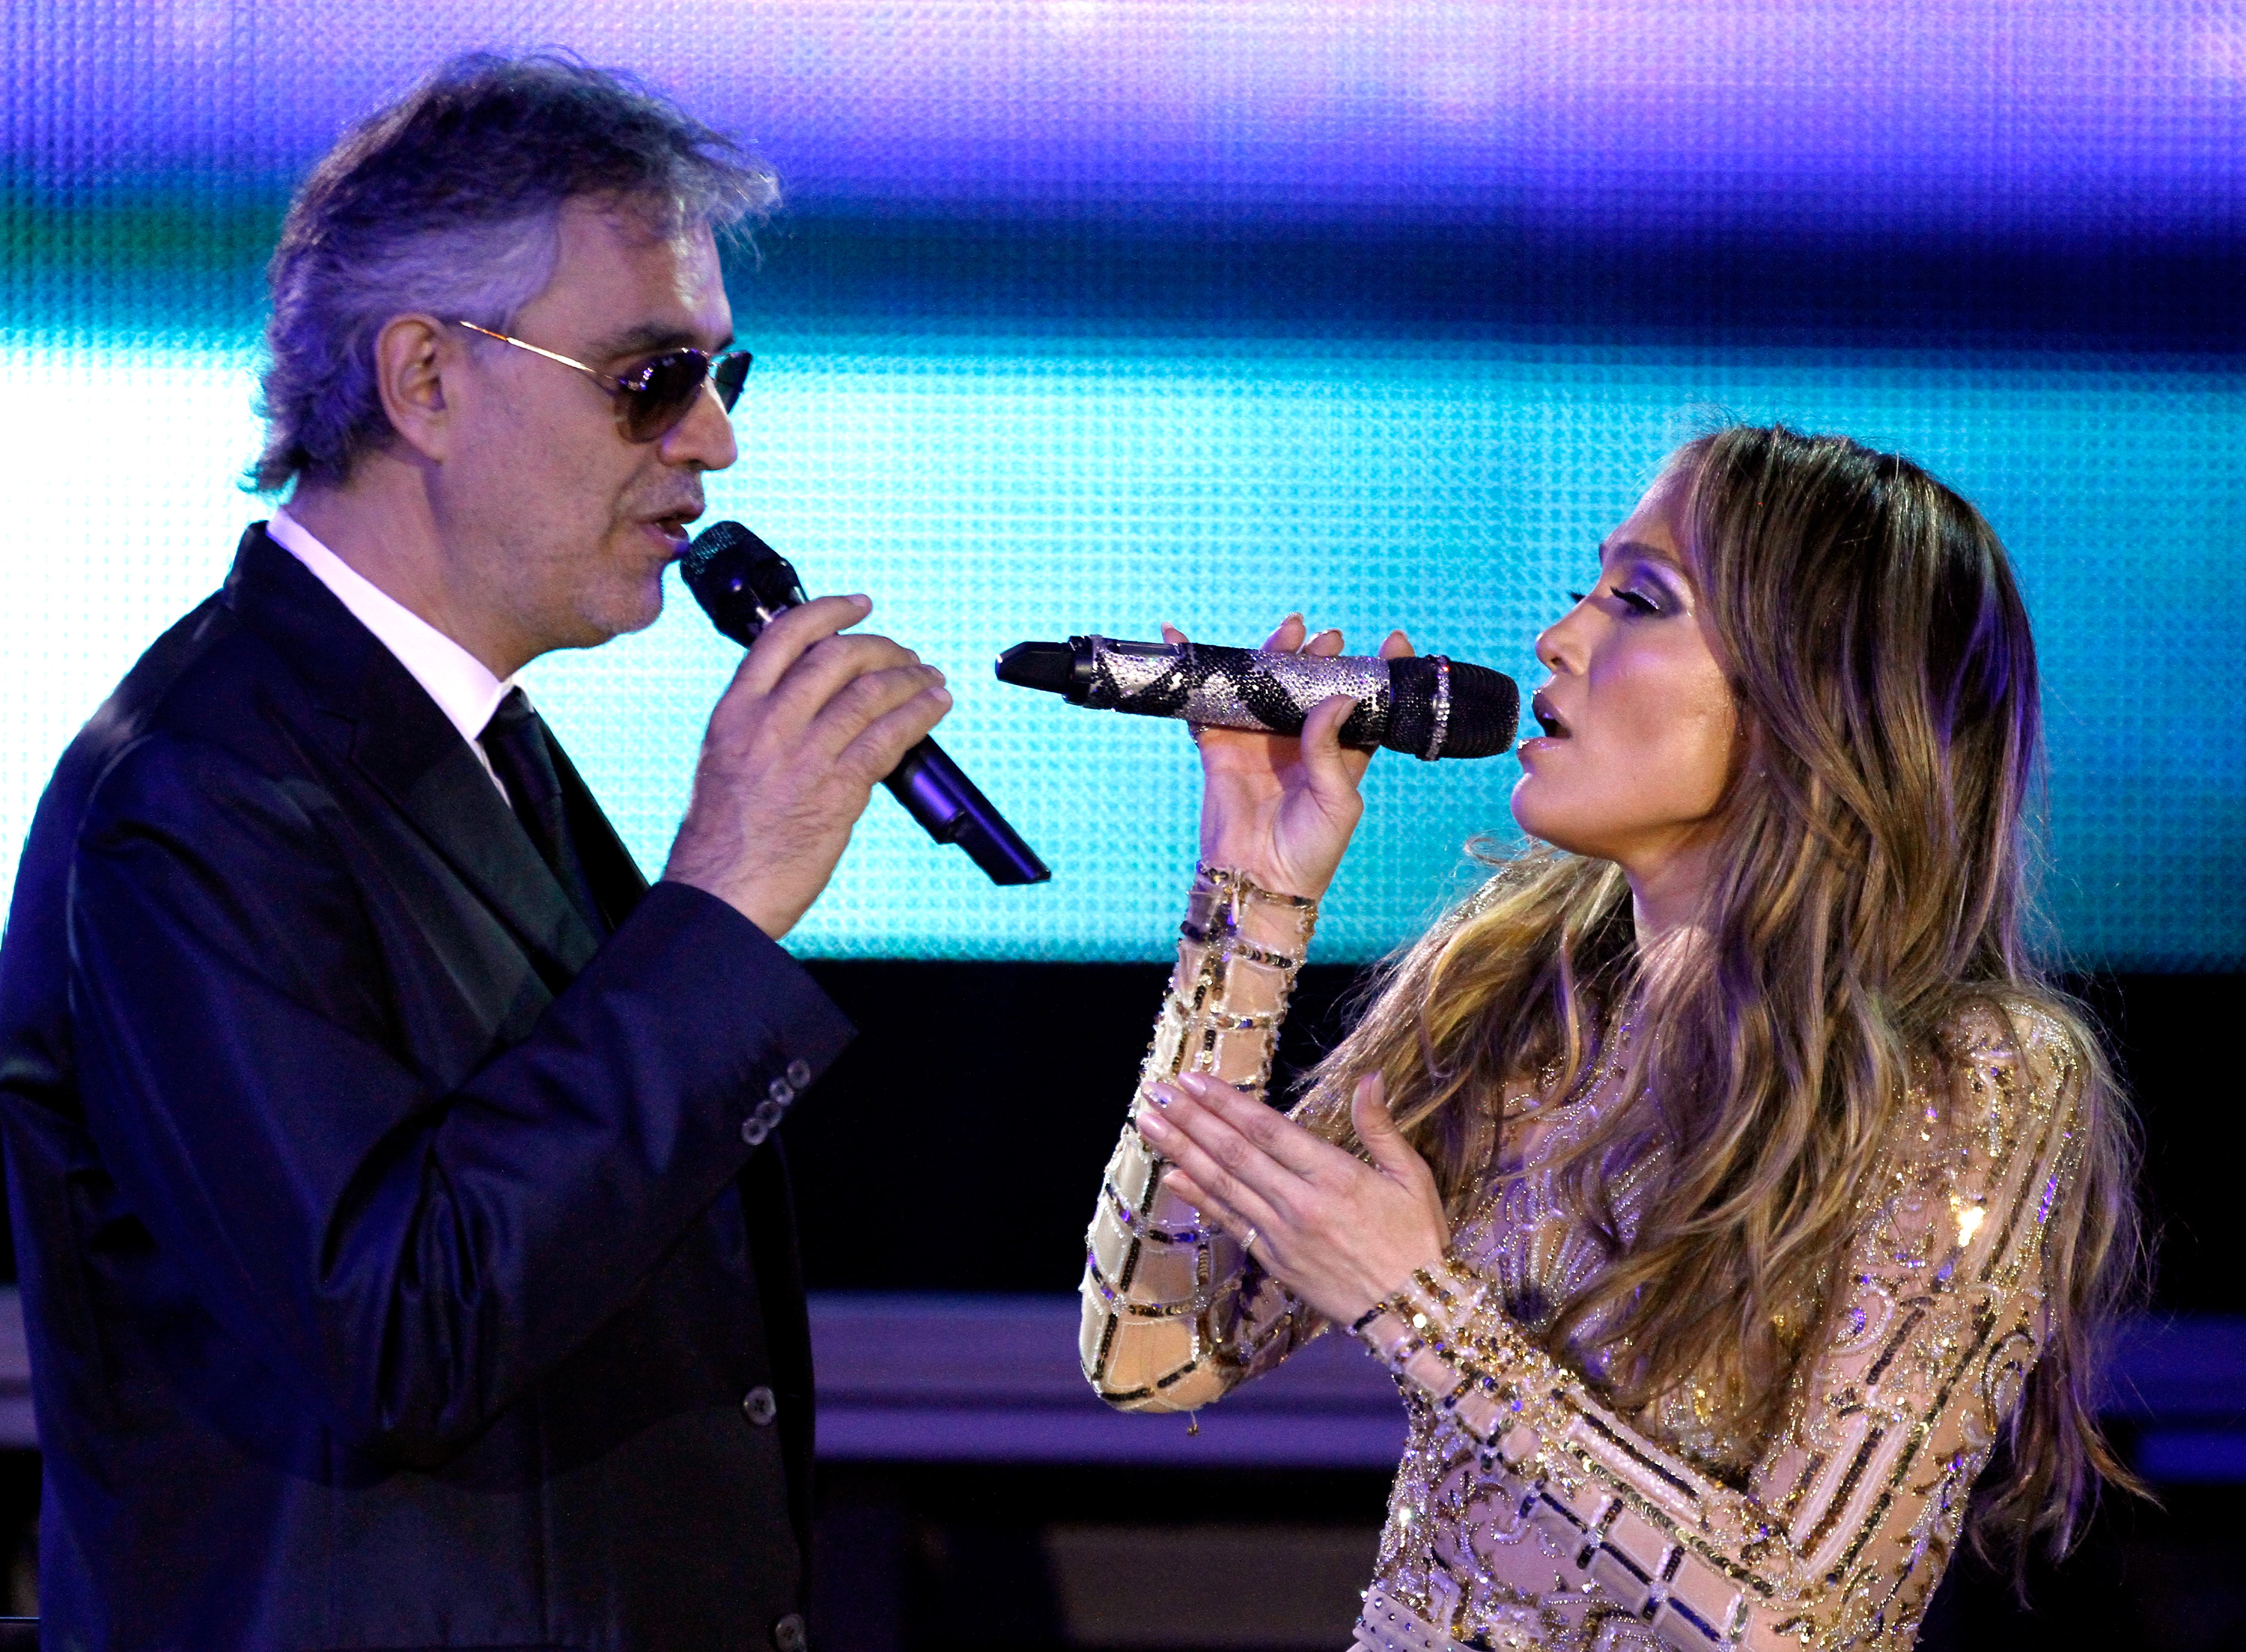 PHOENIX, AZ - MARCH 23:  Singer Andrea Bocelli and singer Jennifer Lopez attend Muhammad Ali's Celebrity Fight Night XIX at JW Marriott Desert Ridge Resort & Spa on March 23, 2013 in Phoenix, Arizona.  (Photo by Mike Moore/Getty Images for Fight Night)